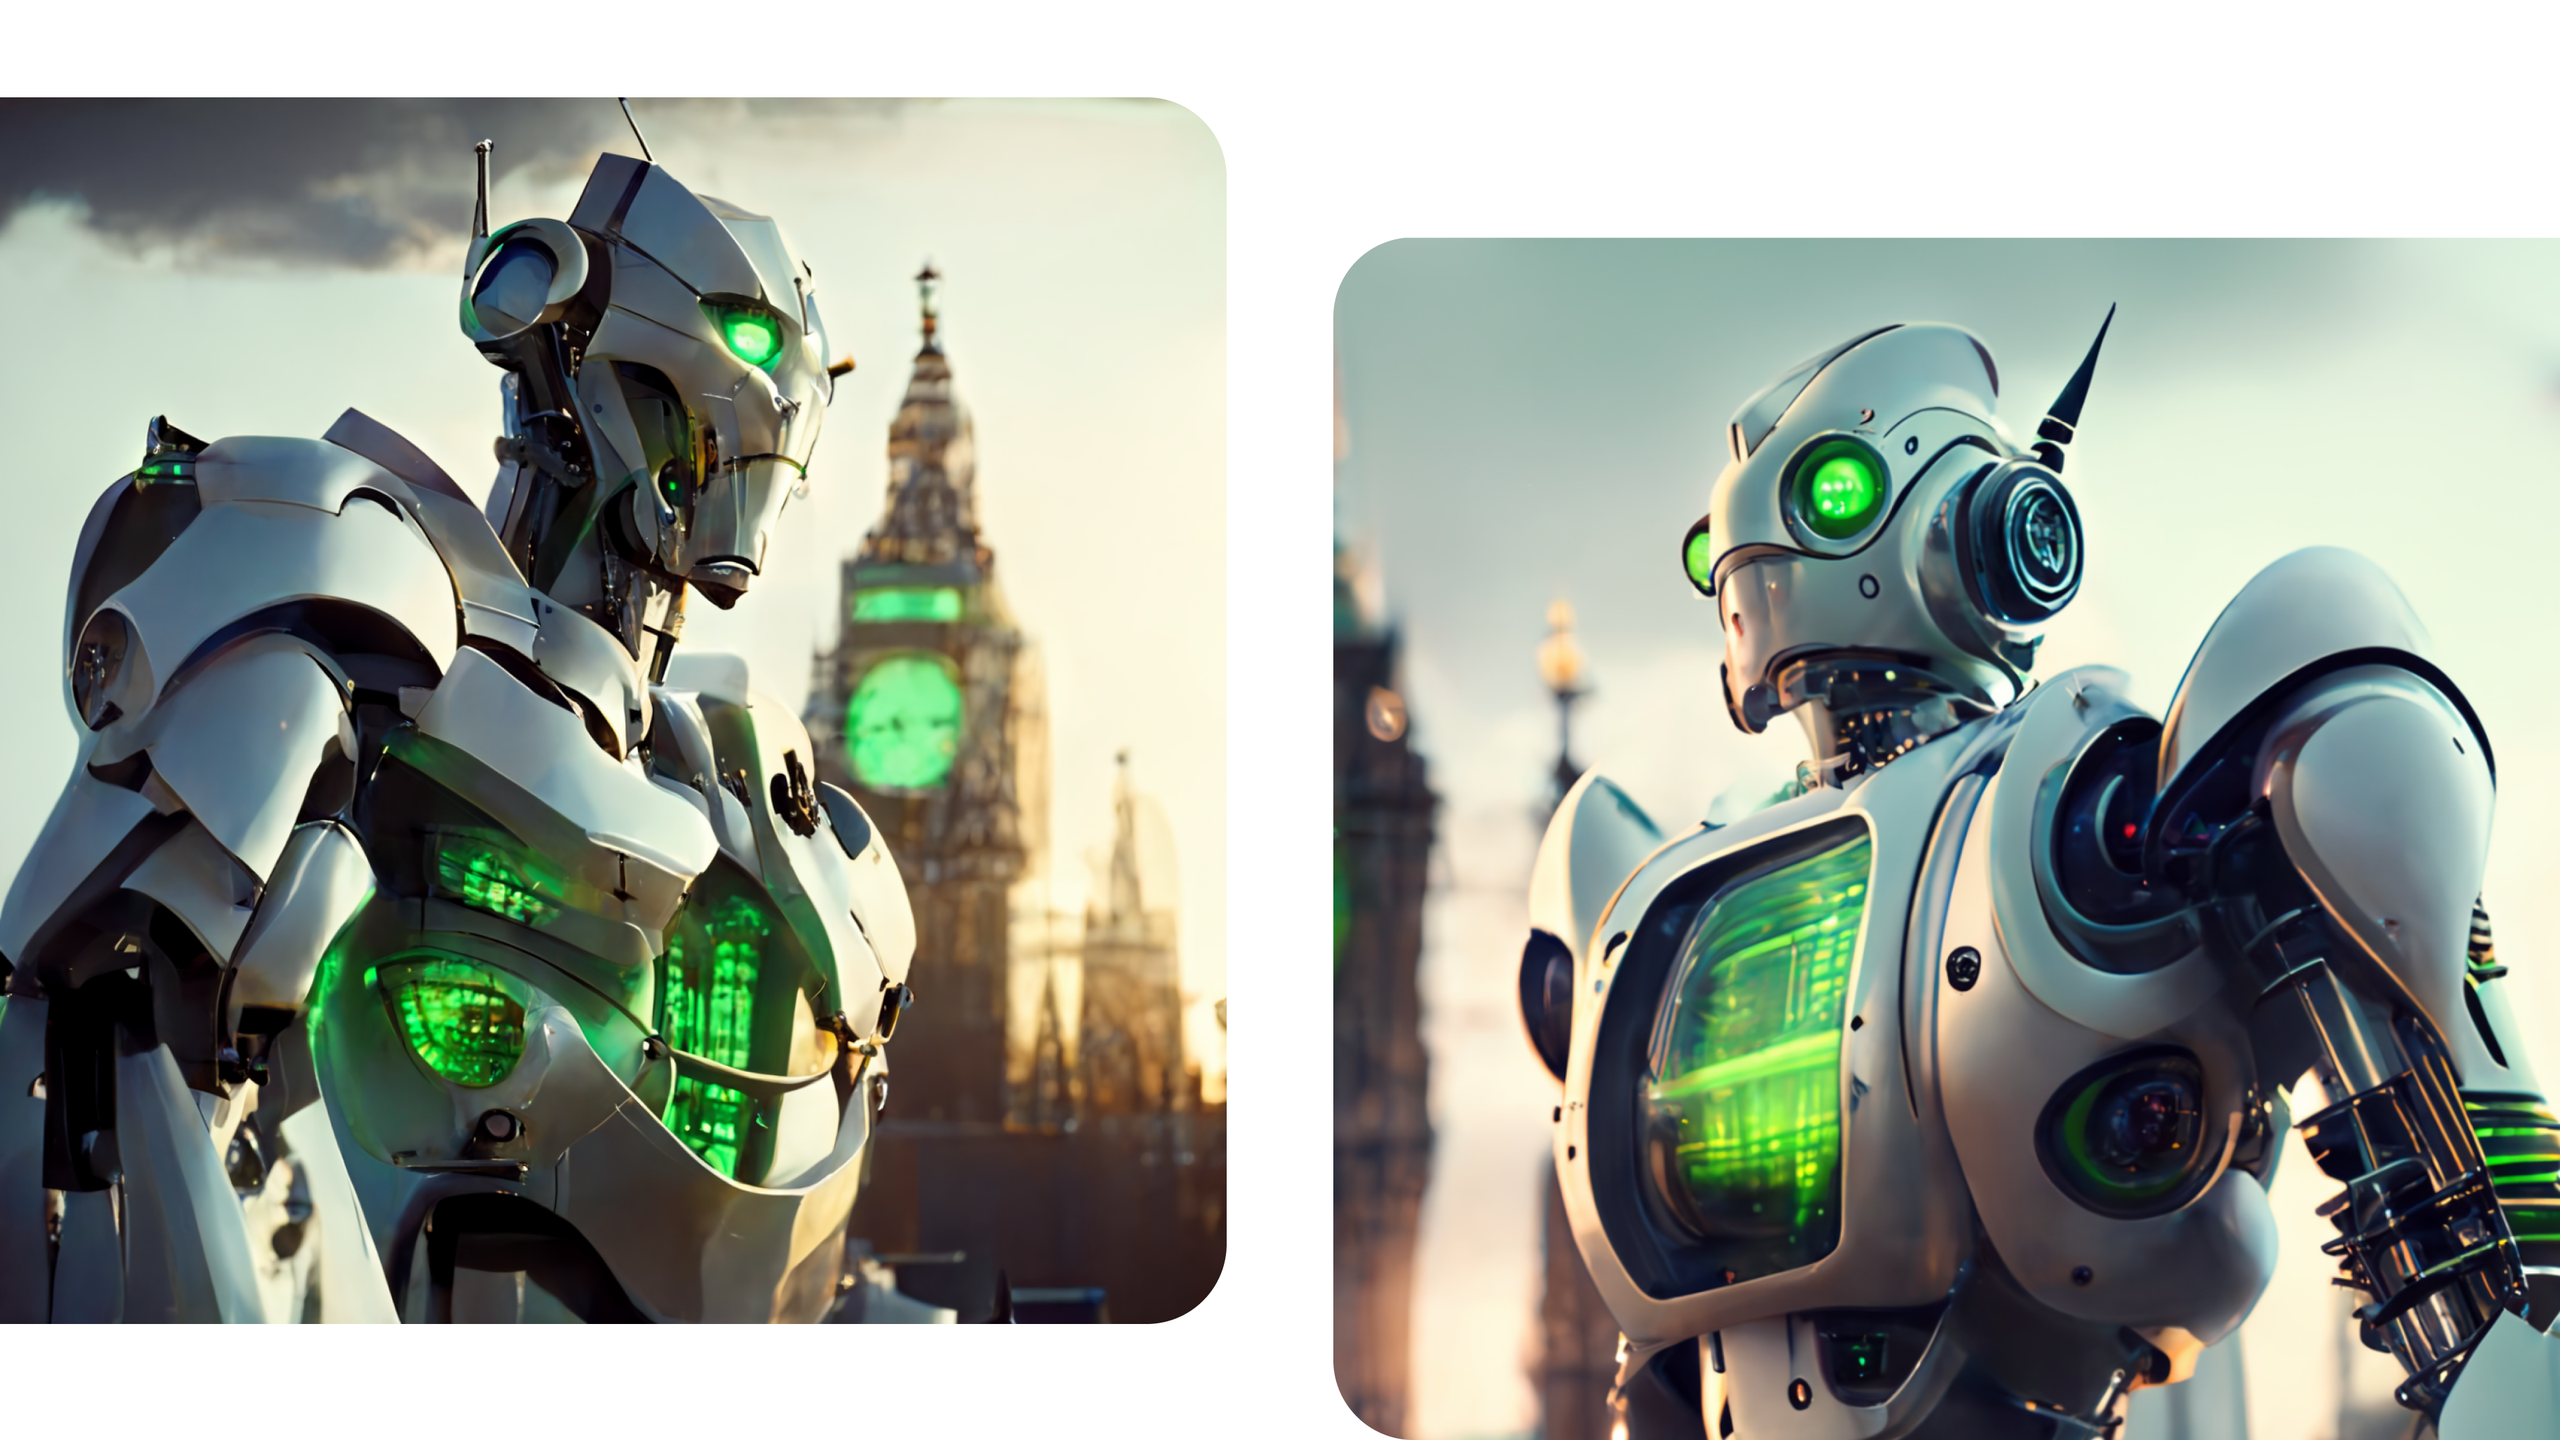 portrait of two sleek futuristic robots with a white exterior and green LED details, Big Ben in the background. Futuristic city, bright lights.